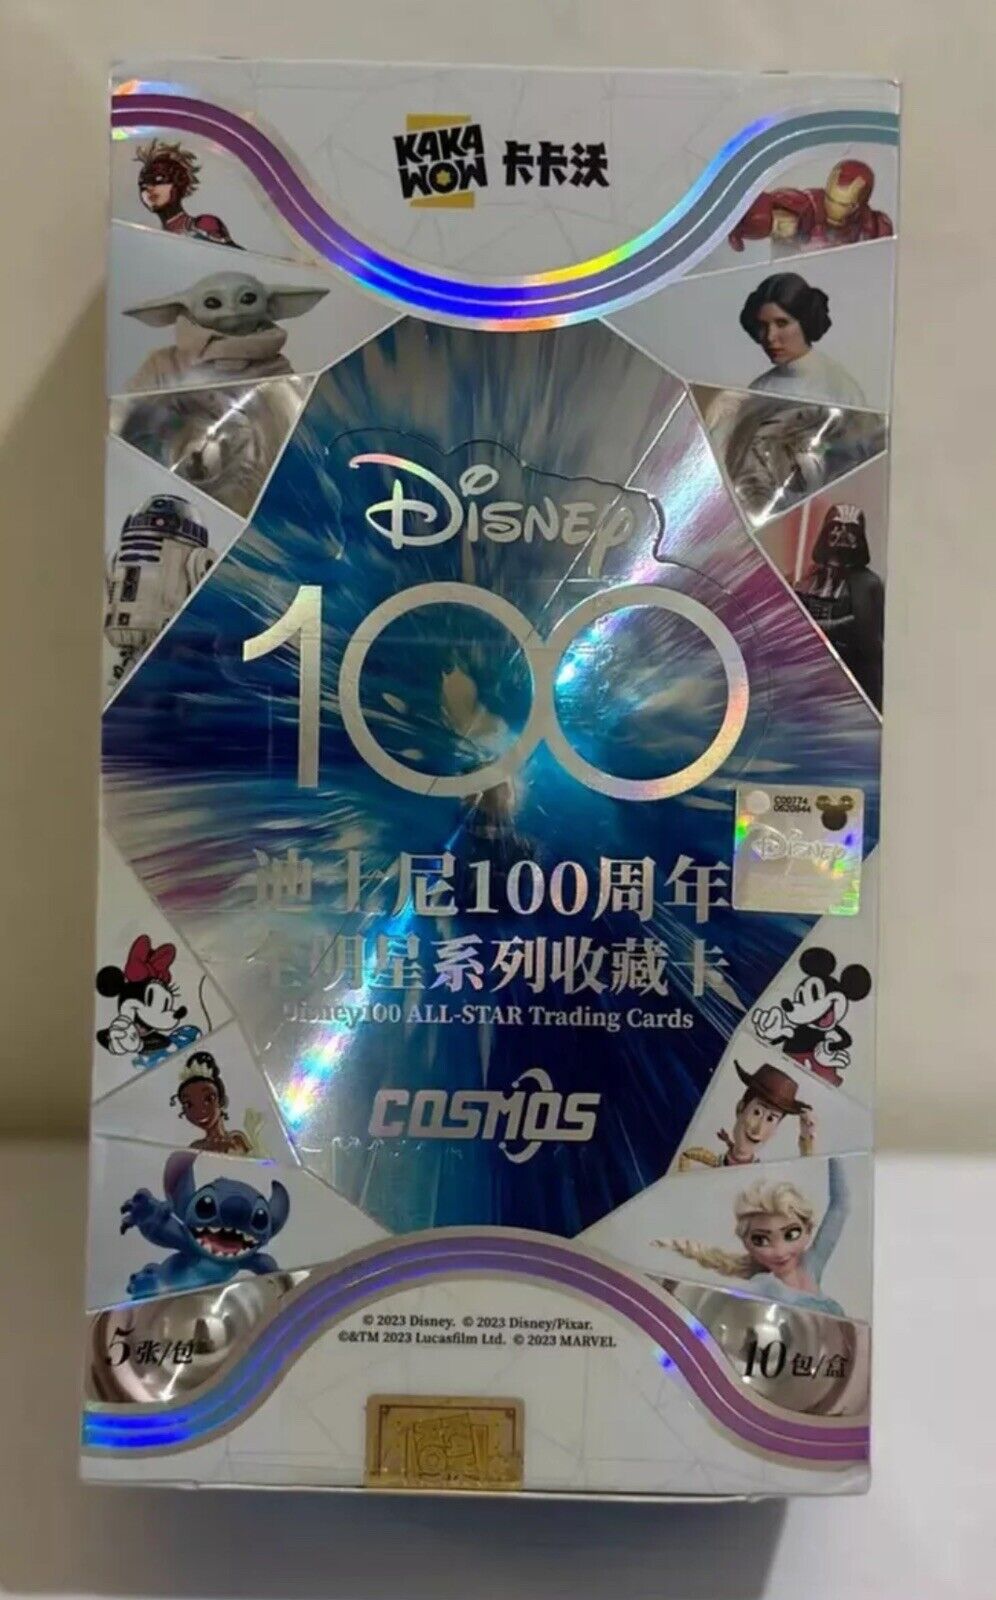 2024 Kakawow Disney 100 Cosmos All Star Trading Card Sealed Box In Hand US Based